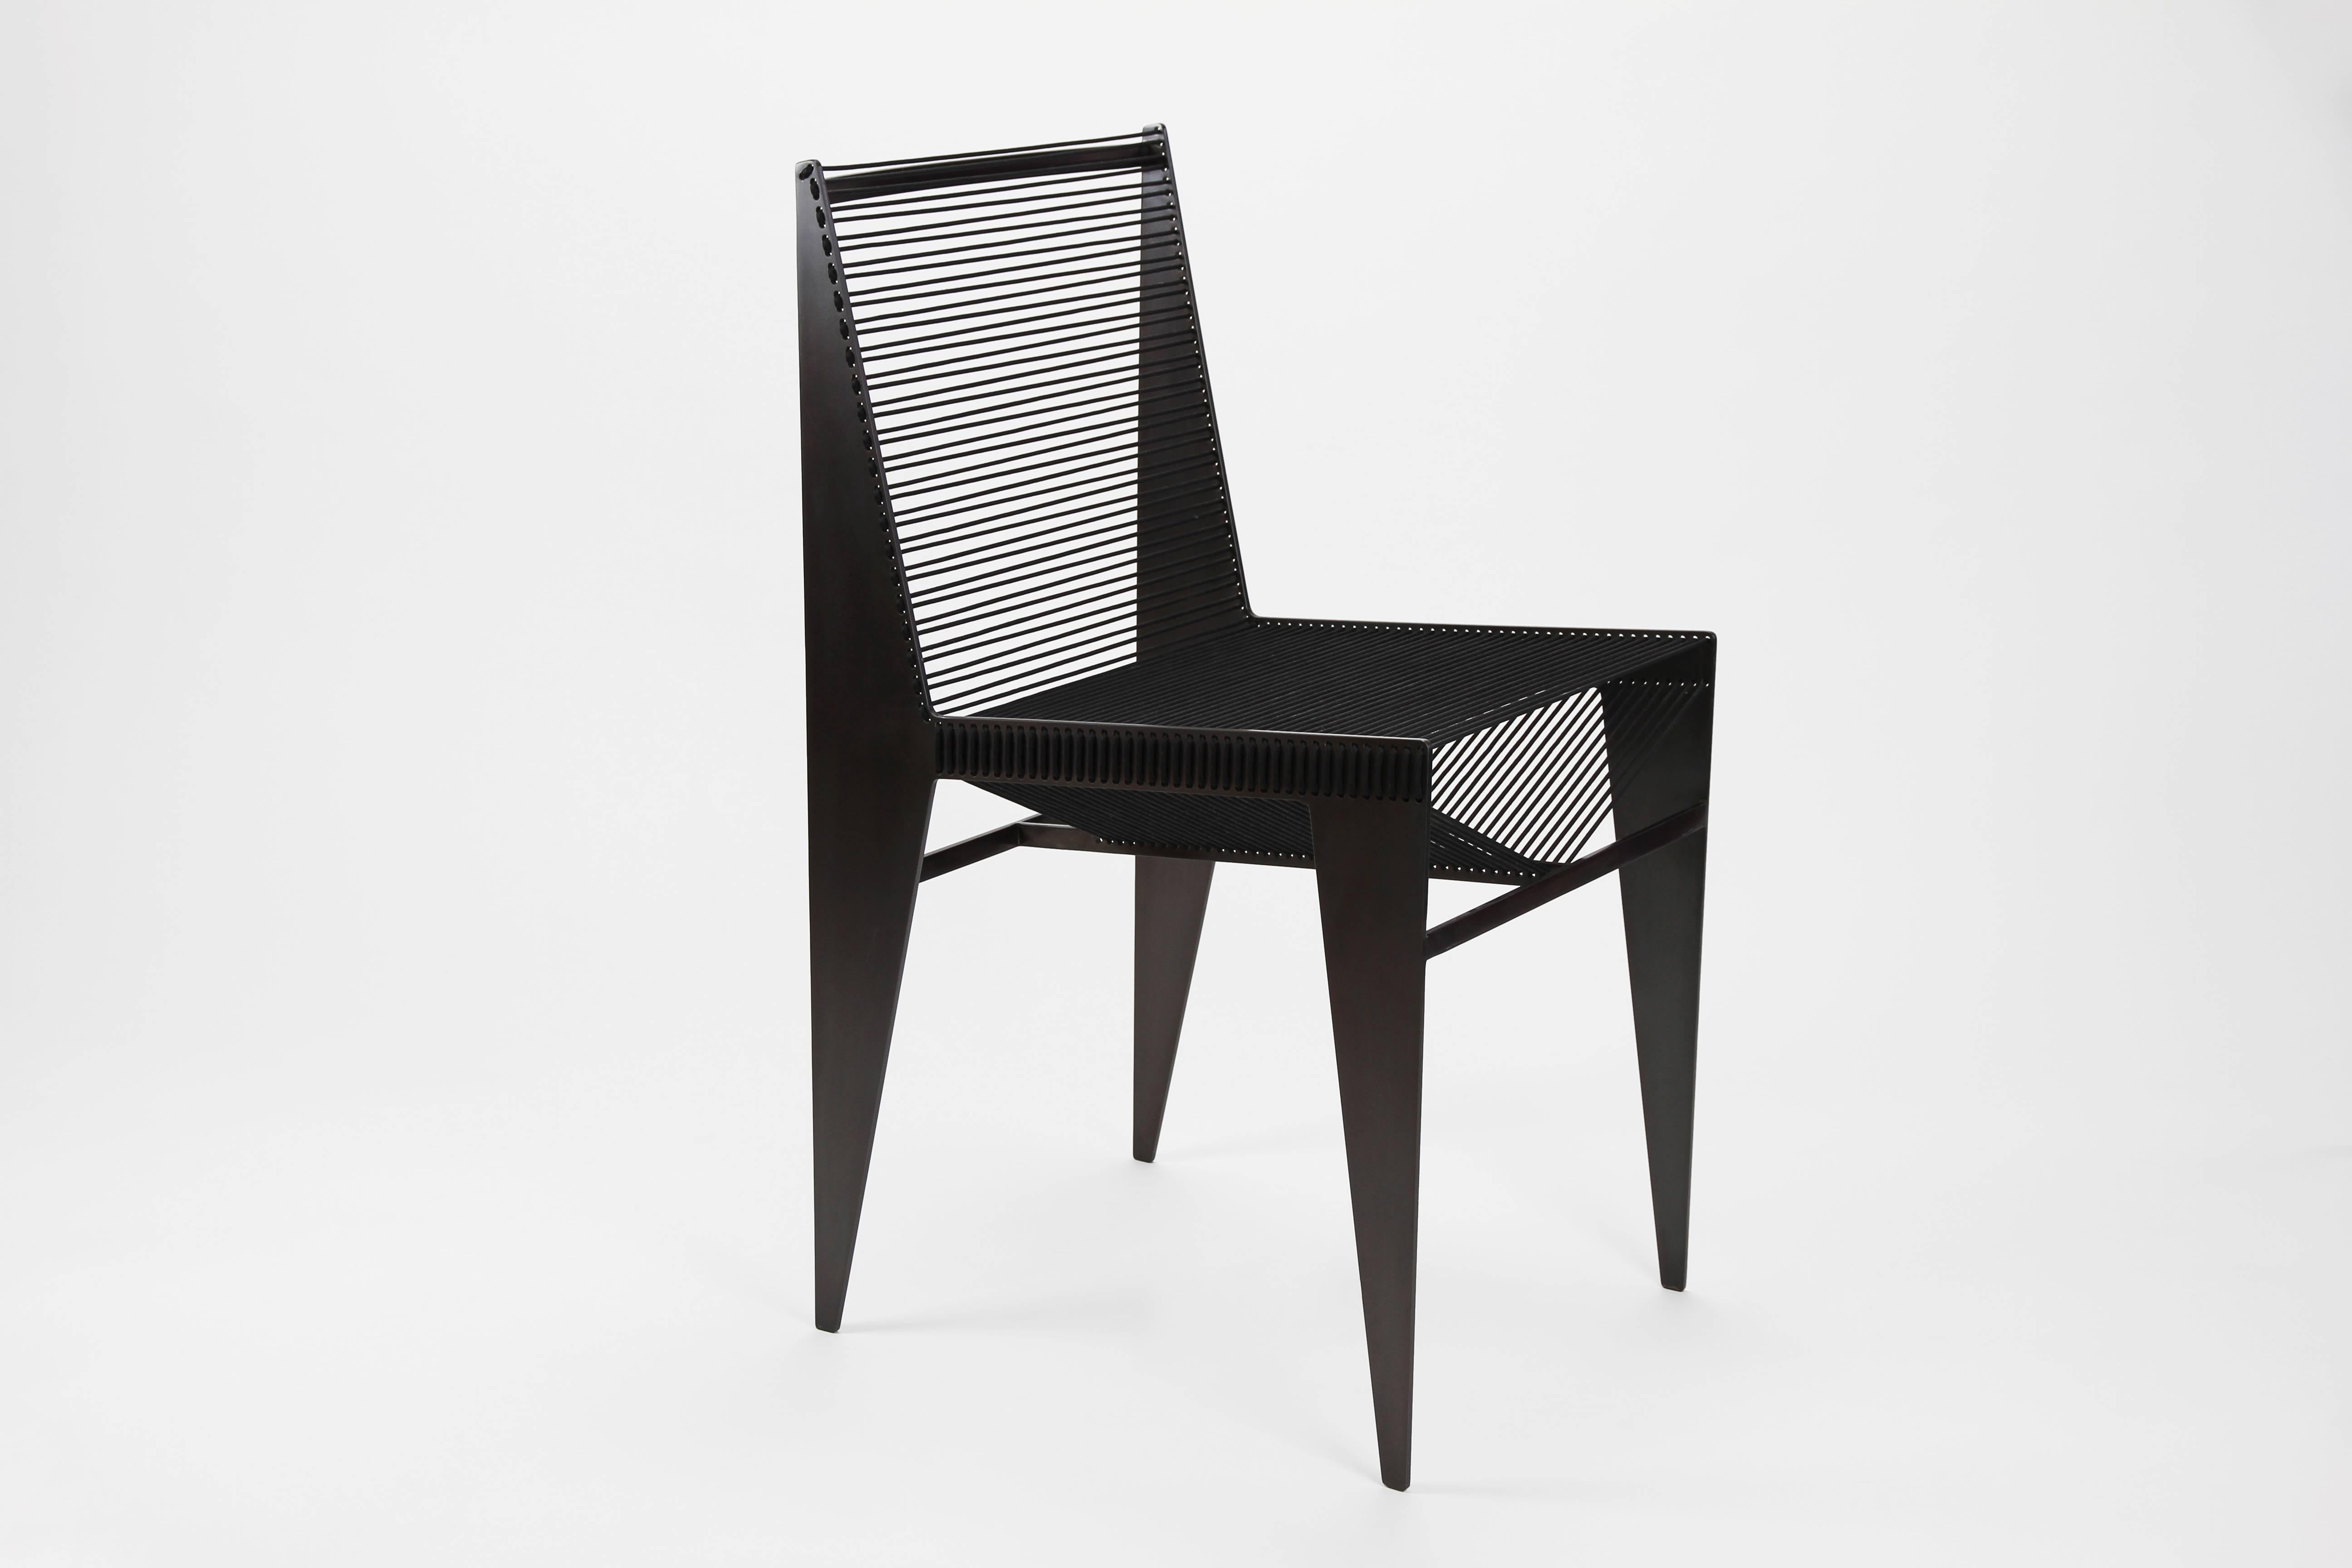 The ICON Chair will add an architectural moment to any room. From all angles the silhouette offers a different set of lines sculpting space and light.  It has a nice weight and works a side or dining chair - indoor or outdoor.  The hand crafted